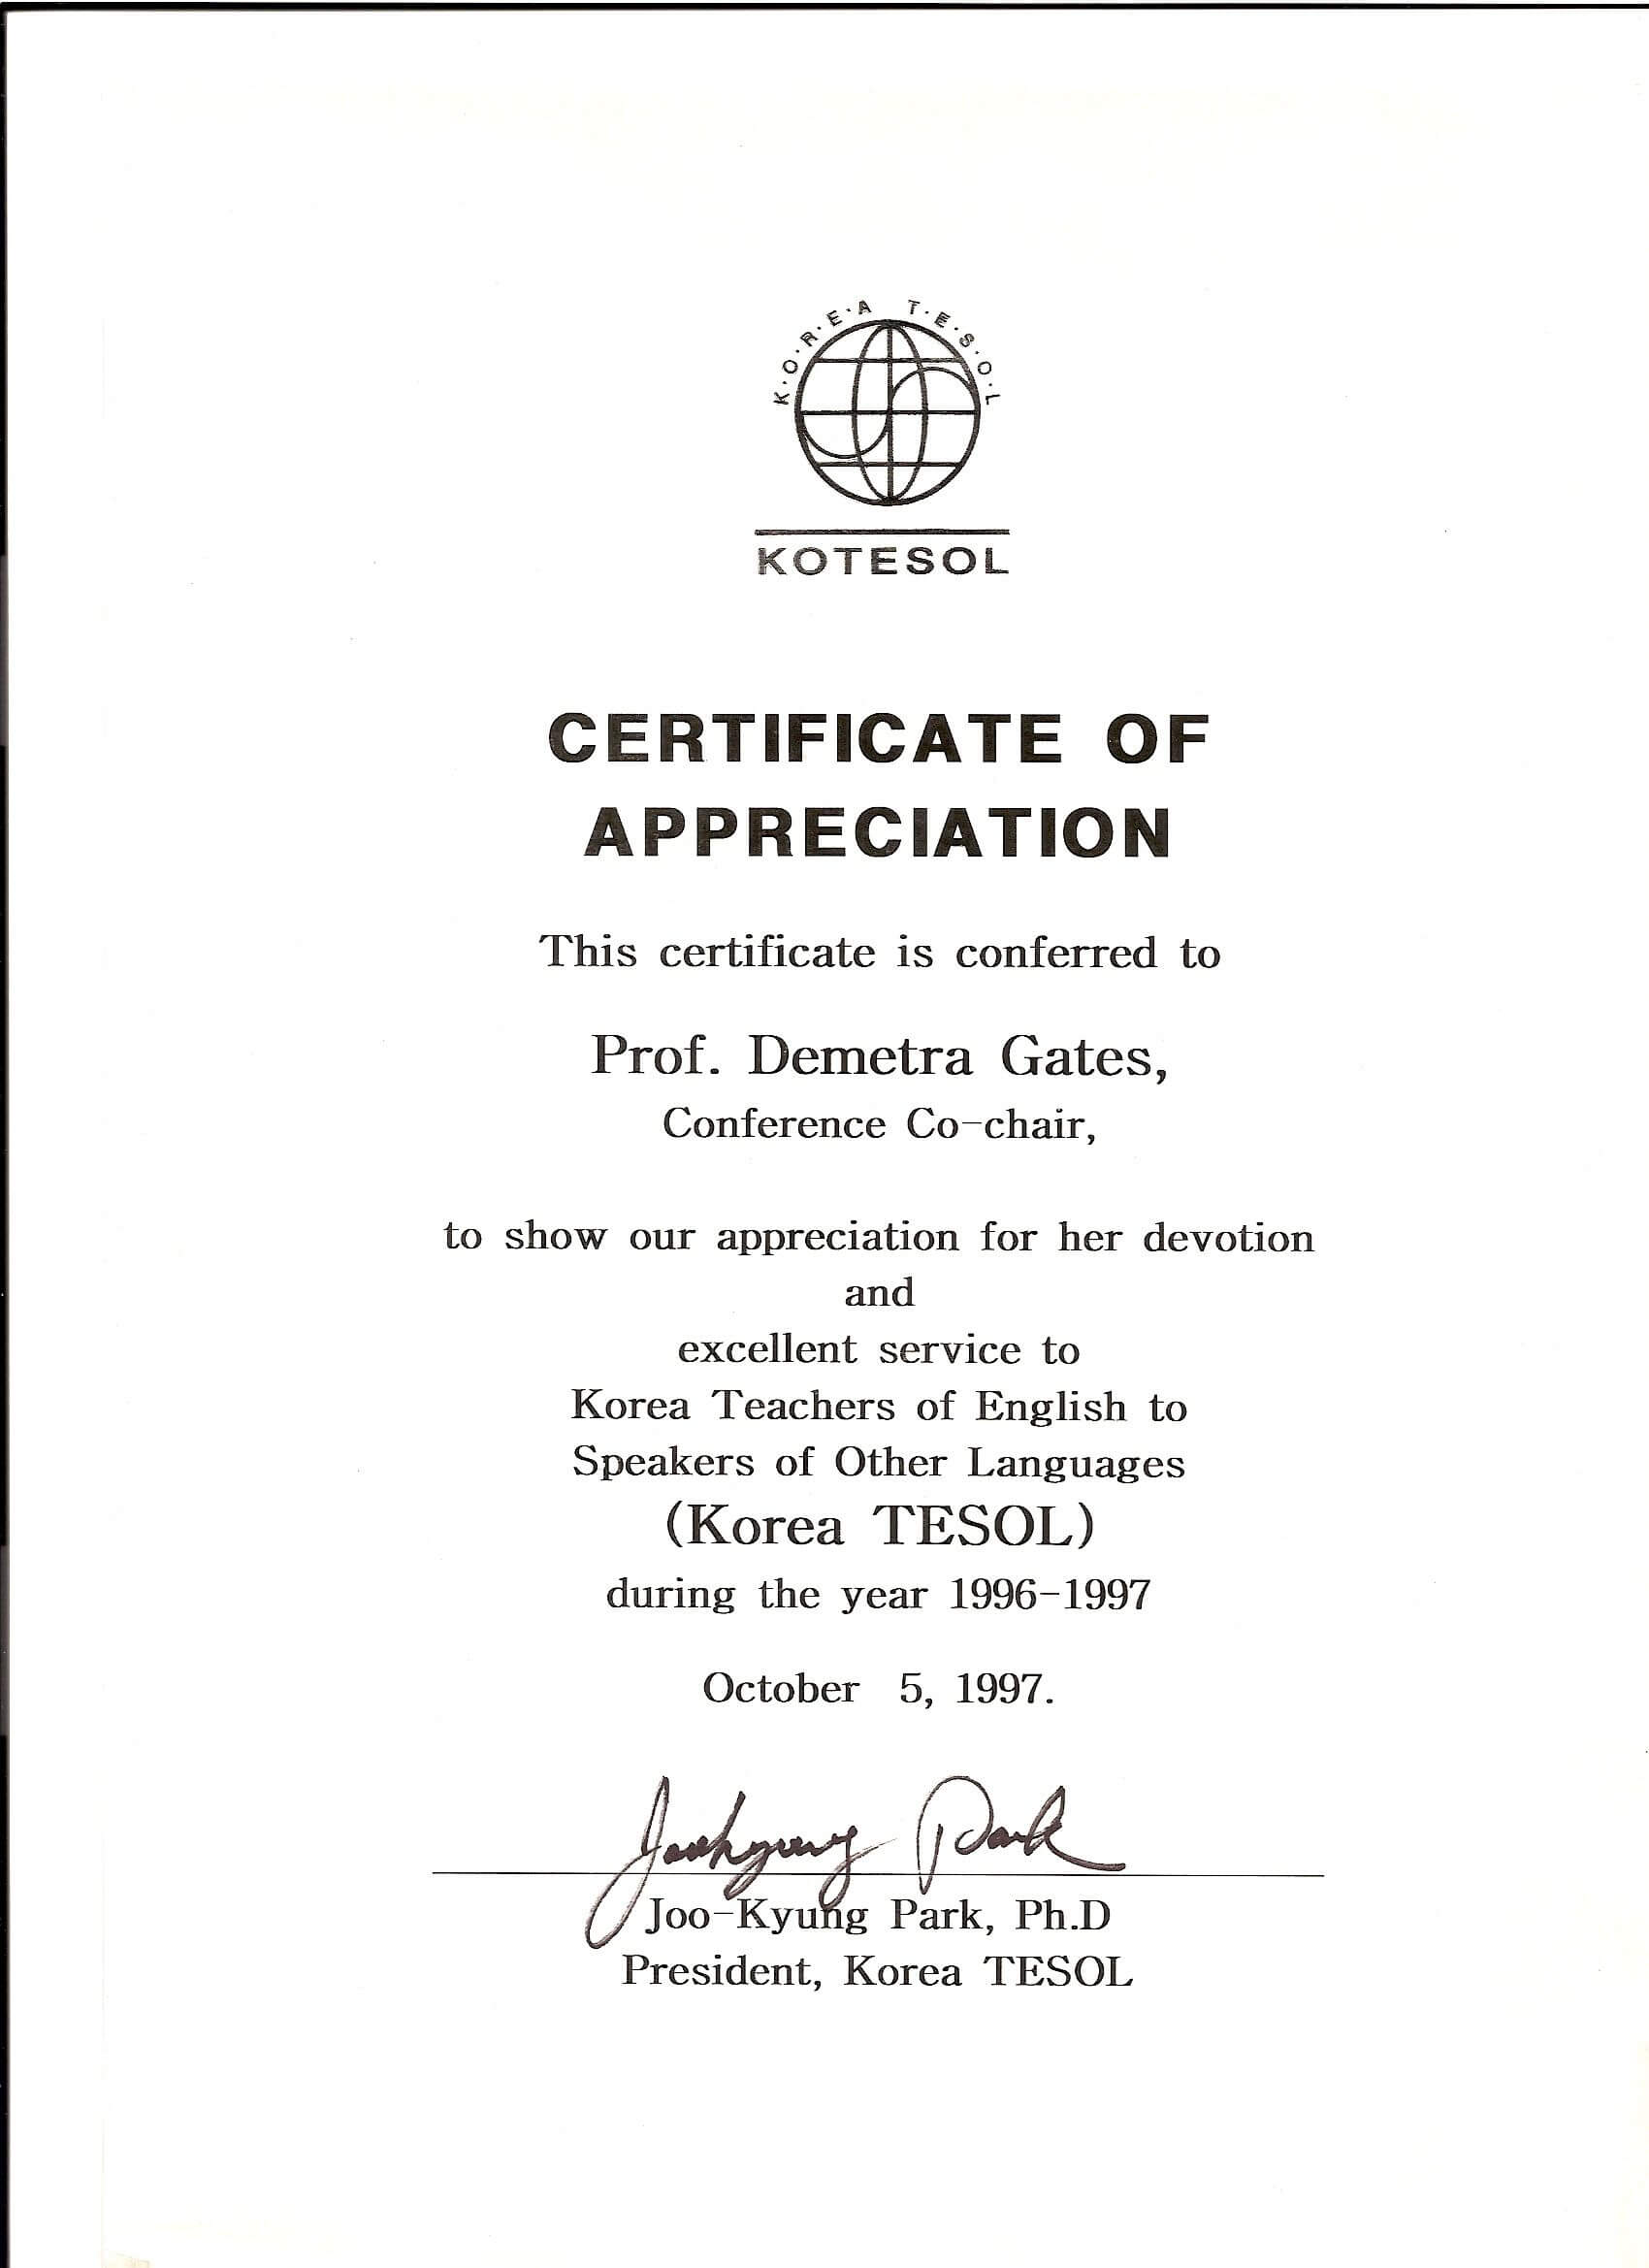 Kotesol Presidential Certificate Of Appreciation (1997 For Army Certificate Of Achievement Template